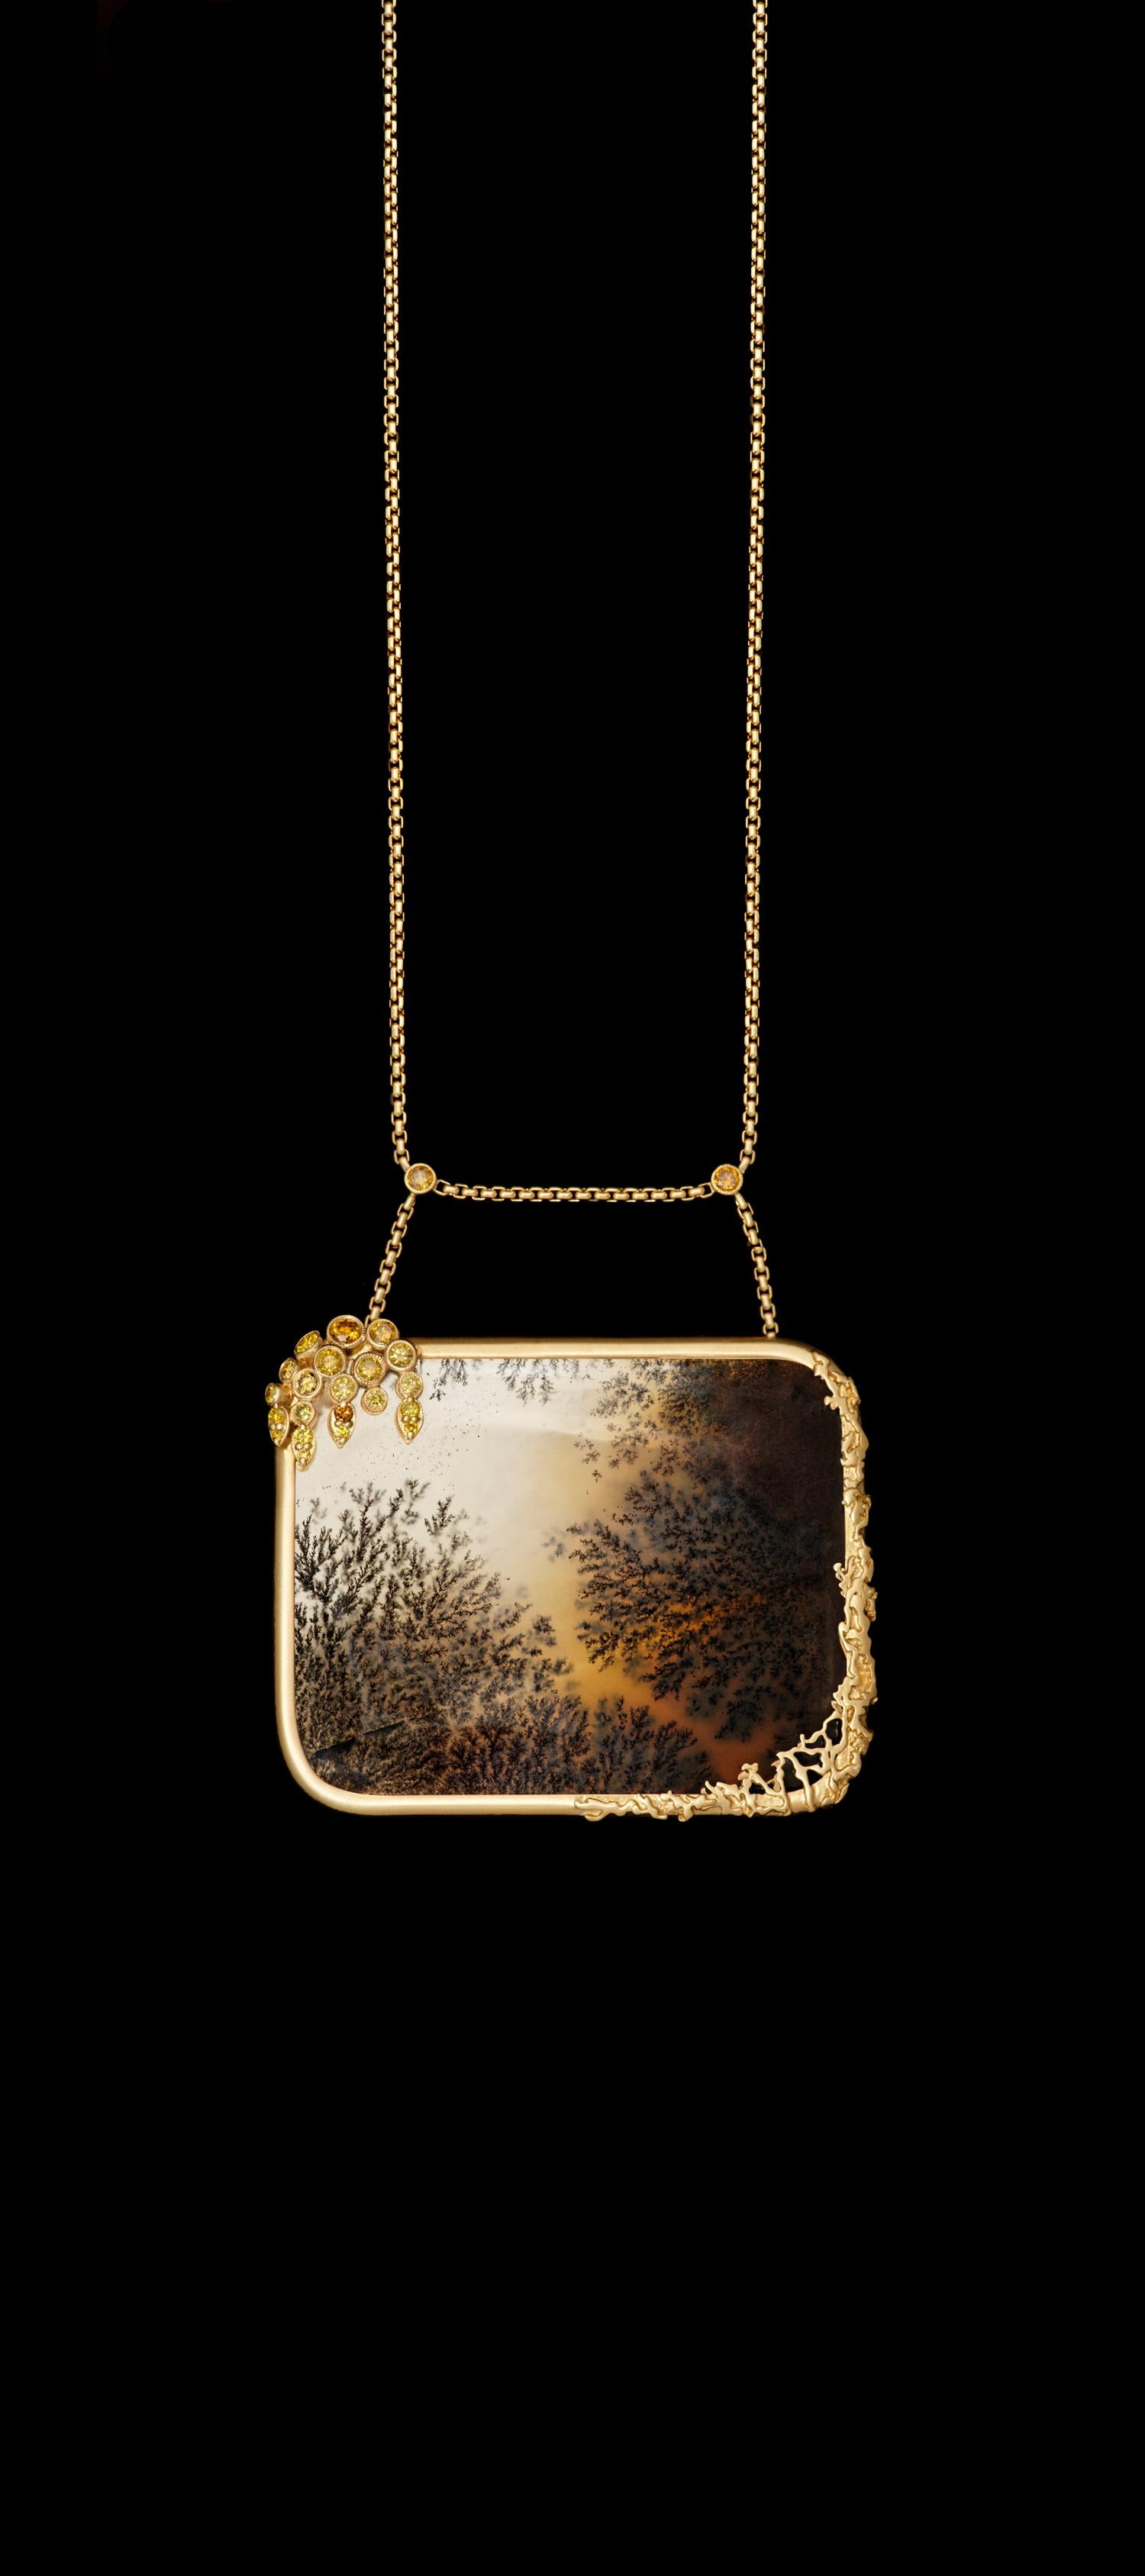 Centering upon a dendritic agate plaque, framed within an 18K gold frame accented with a canary & cognac diamond 'weeping willow' frond and foliate motifs, suspended from a similarly-set 18K gold link chain.

Made in New York City.

Description:
The